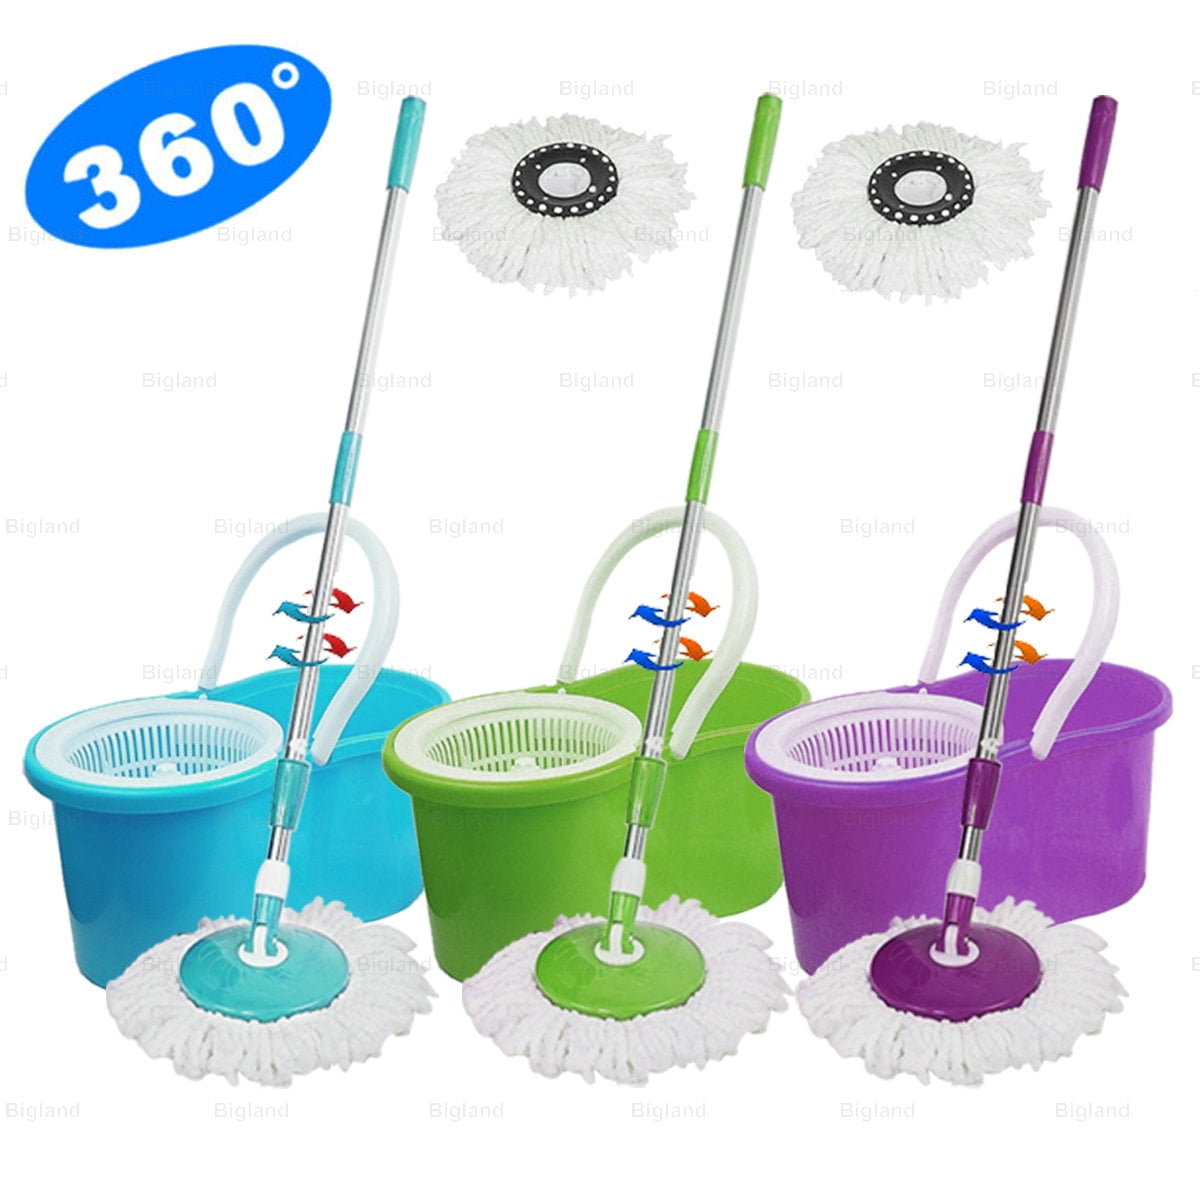 360 Degree Rotating Spinning Spin Mop Bucket Adjustable Handle 2 Cleaning Heads 